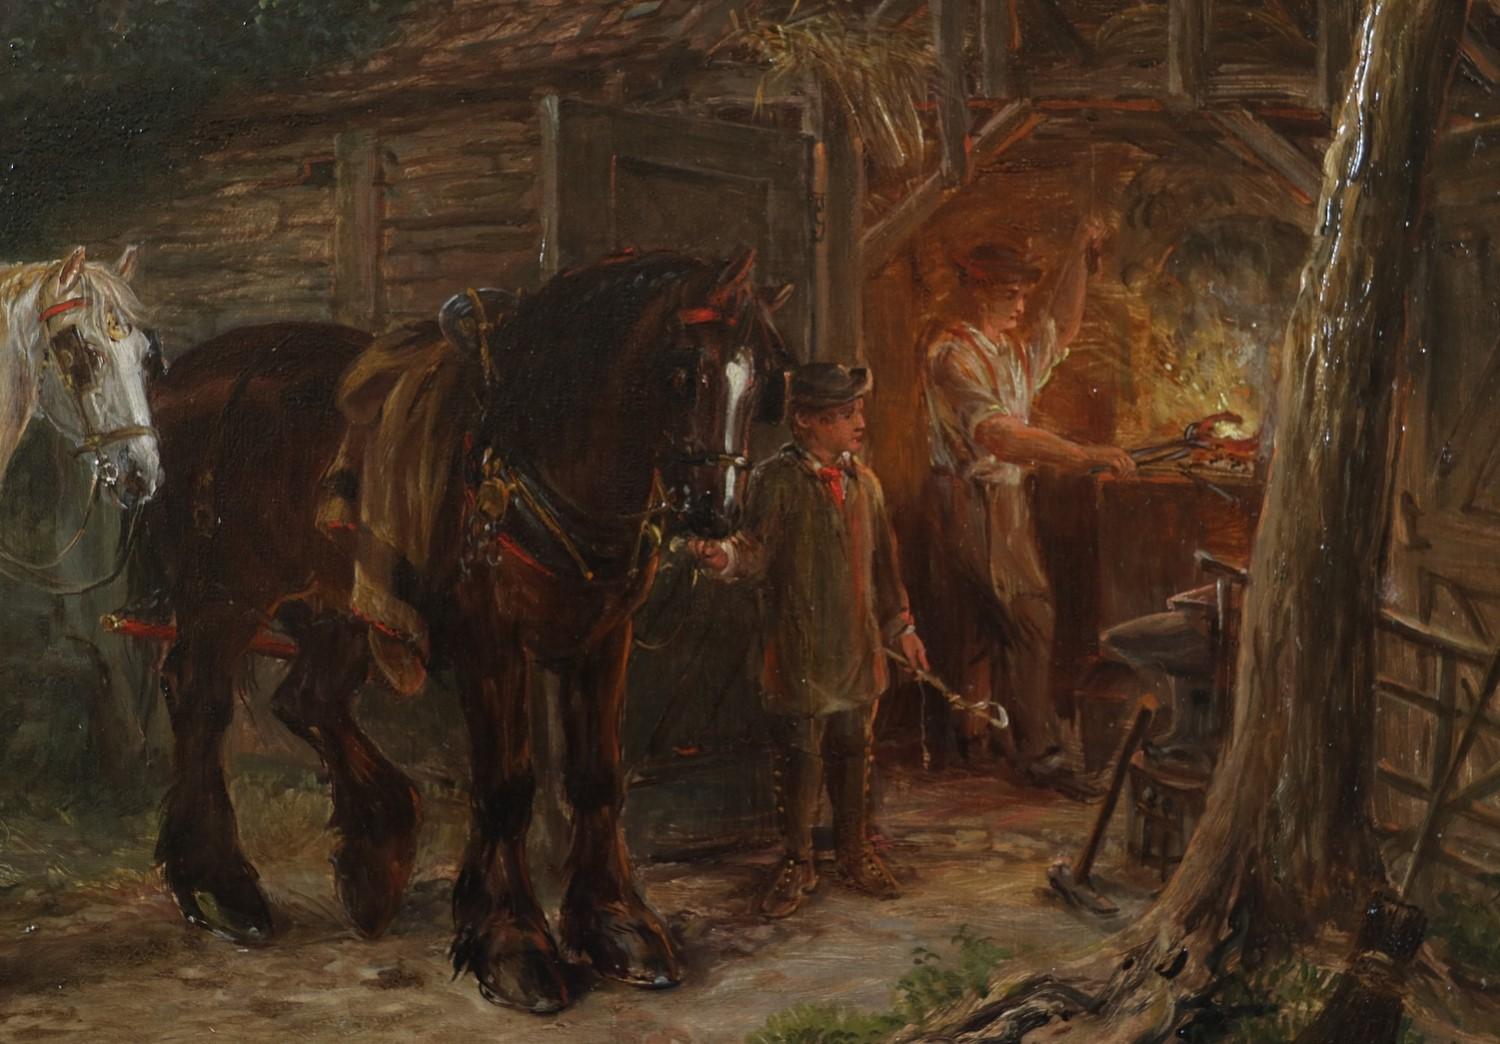 Horses at the Village Forge with Blacksmith and Lumber Cart and Dog watching - Painting by Edwin Frederick Holt